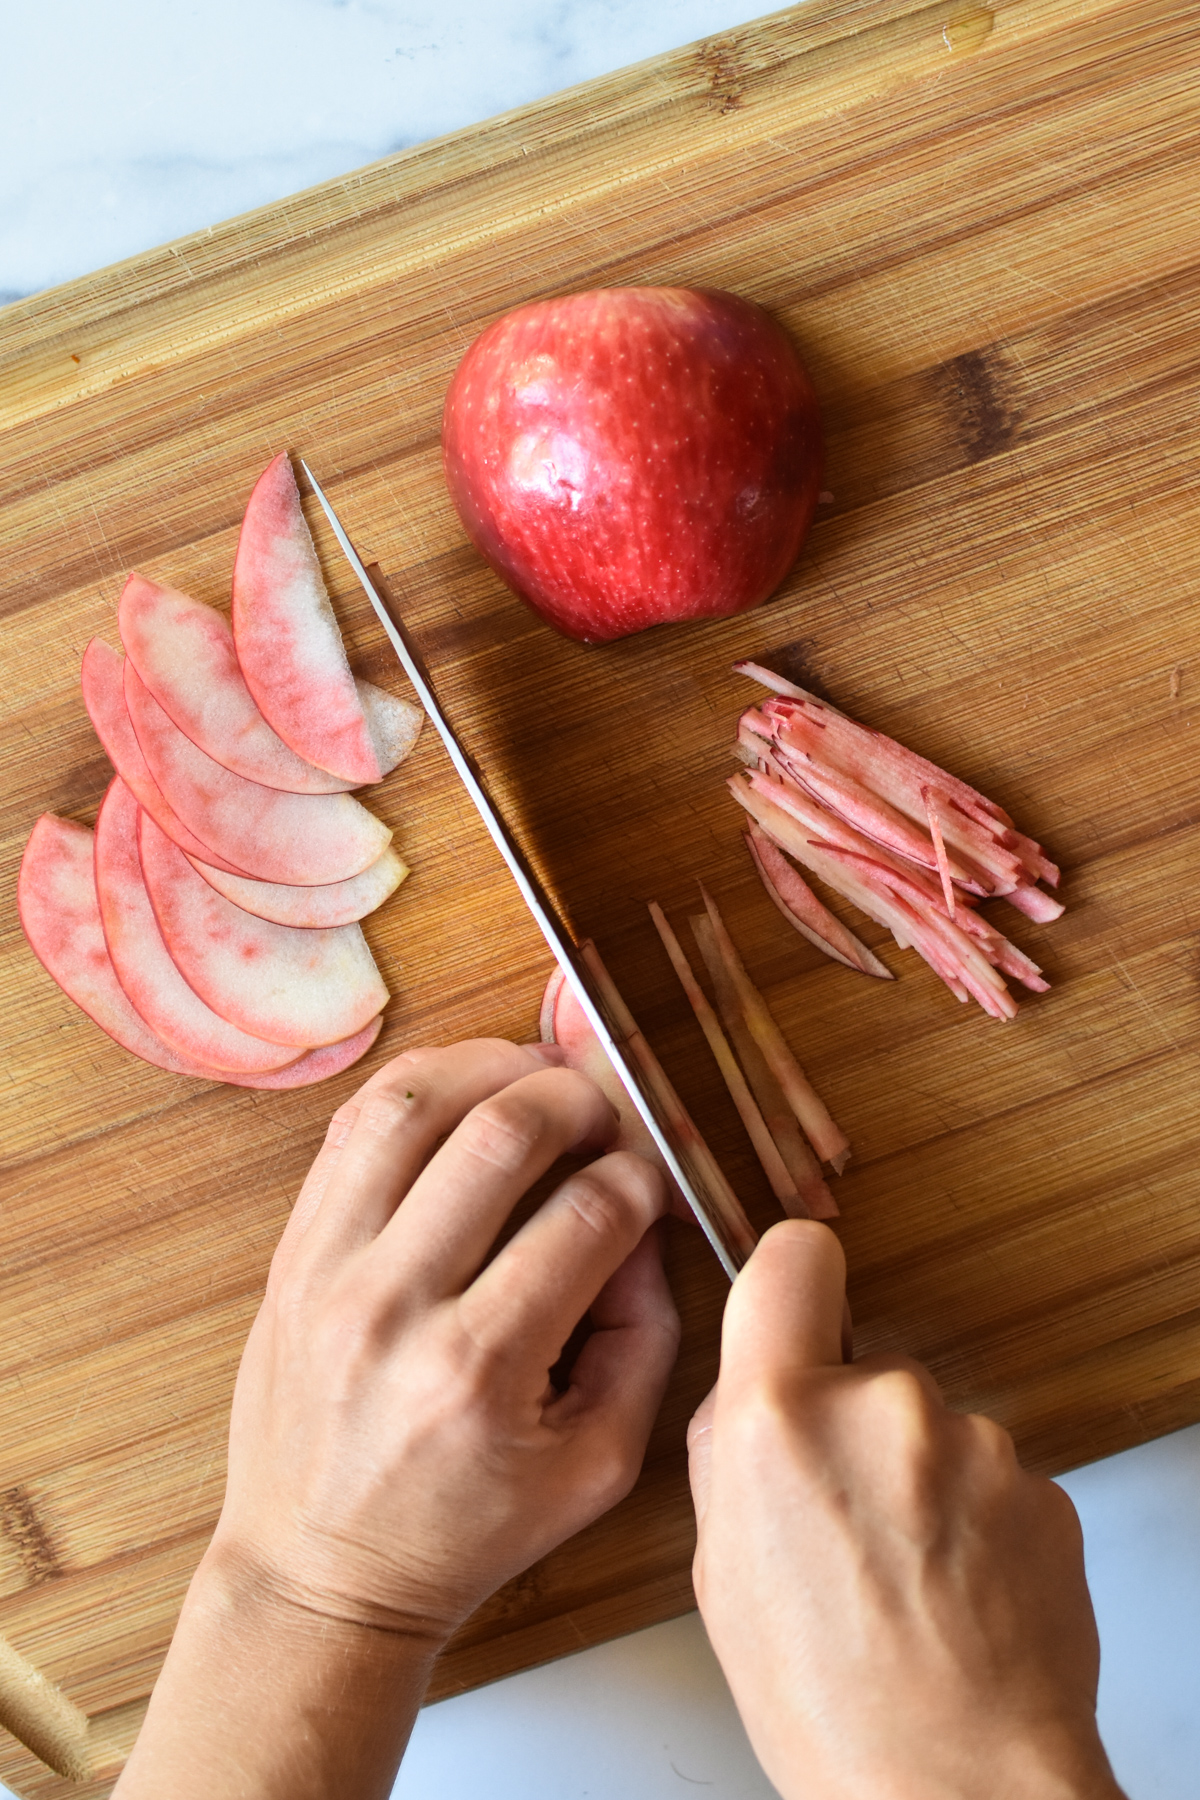 how to julienne apples with a knife